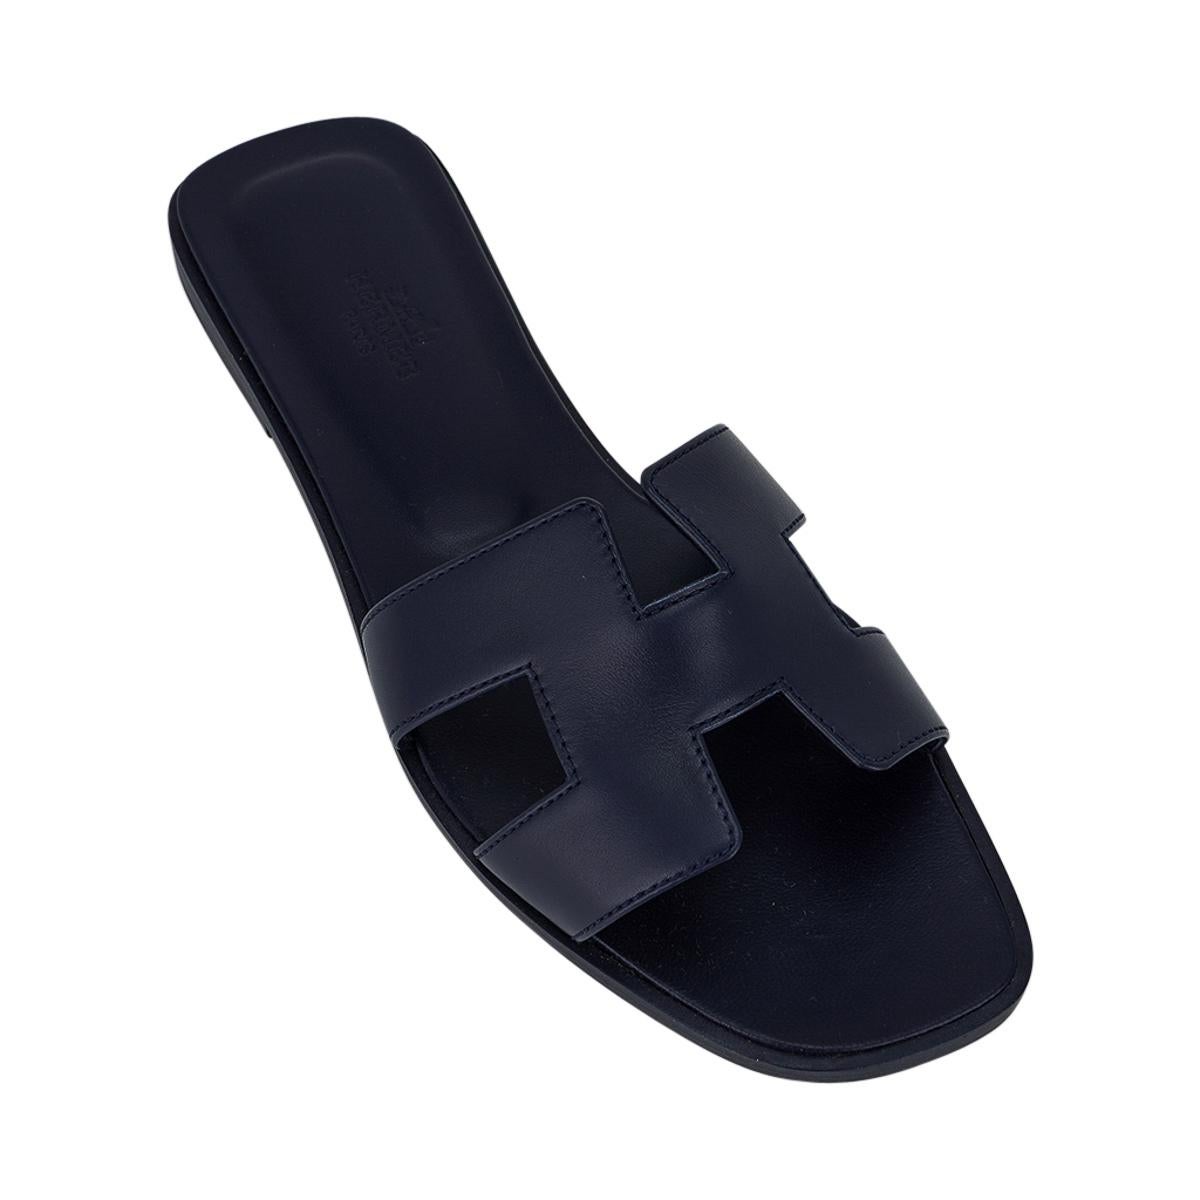 Mightychic offers Hermes Oran flat sandals featured in Bleu Marine.
This stunning box calfskin leather Hermes Oran slide sandal is in a richly saturated blue navy hue - stunning.
The iconic H cutout over the top of the foot.
Matching embossed